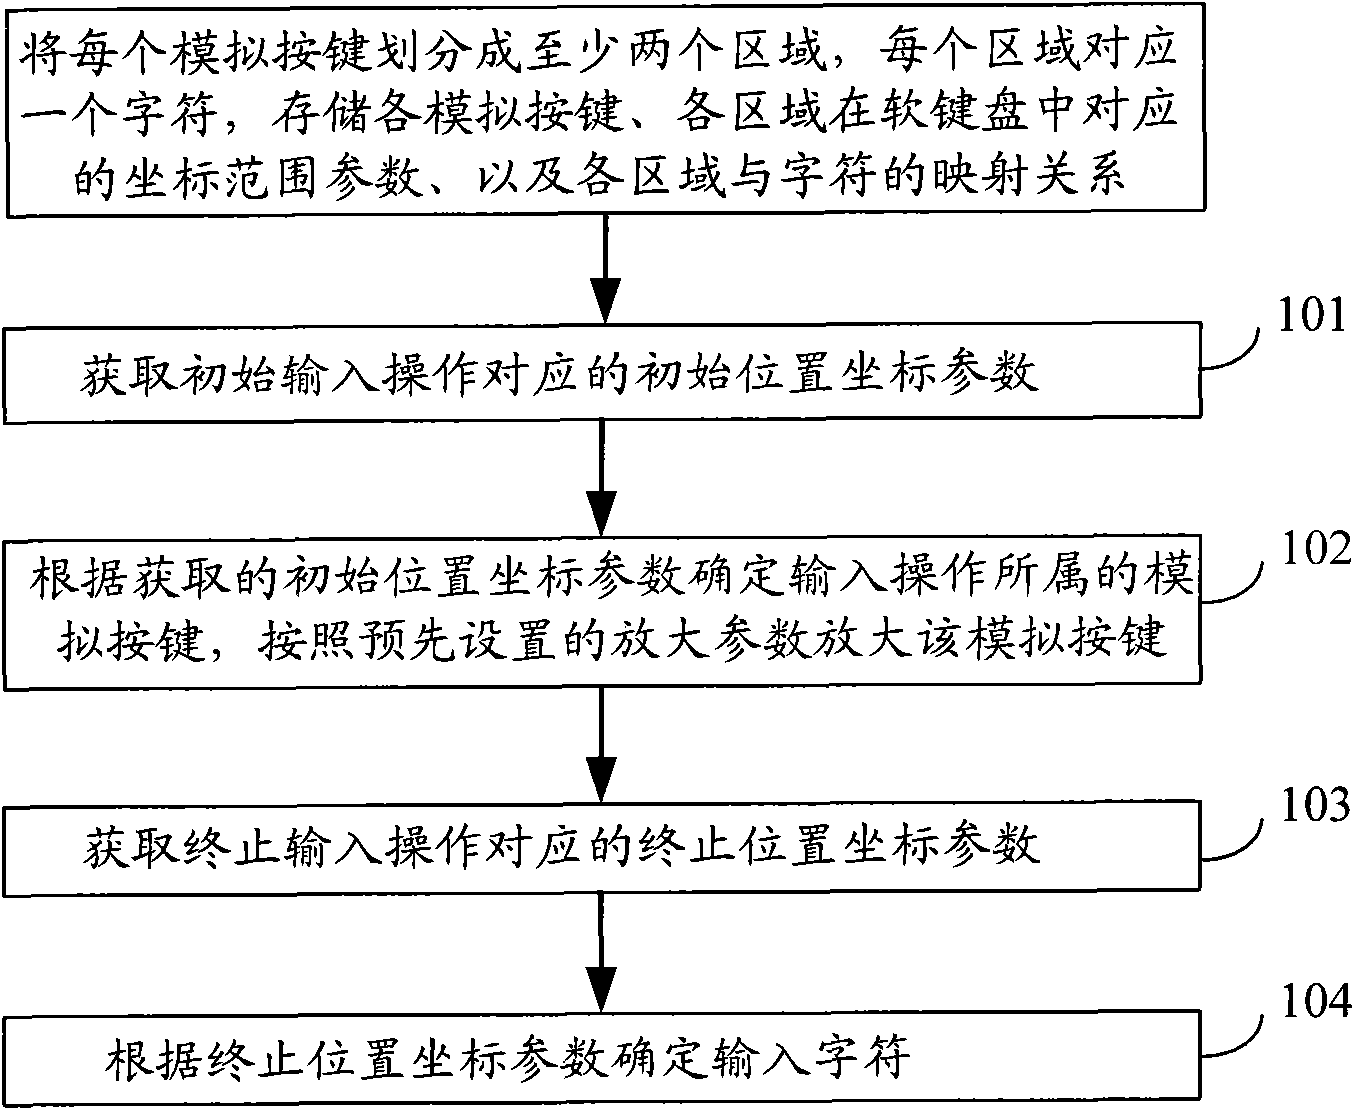 Method and device for inputting characters by touch screen